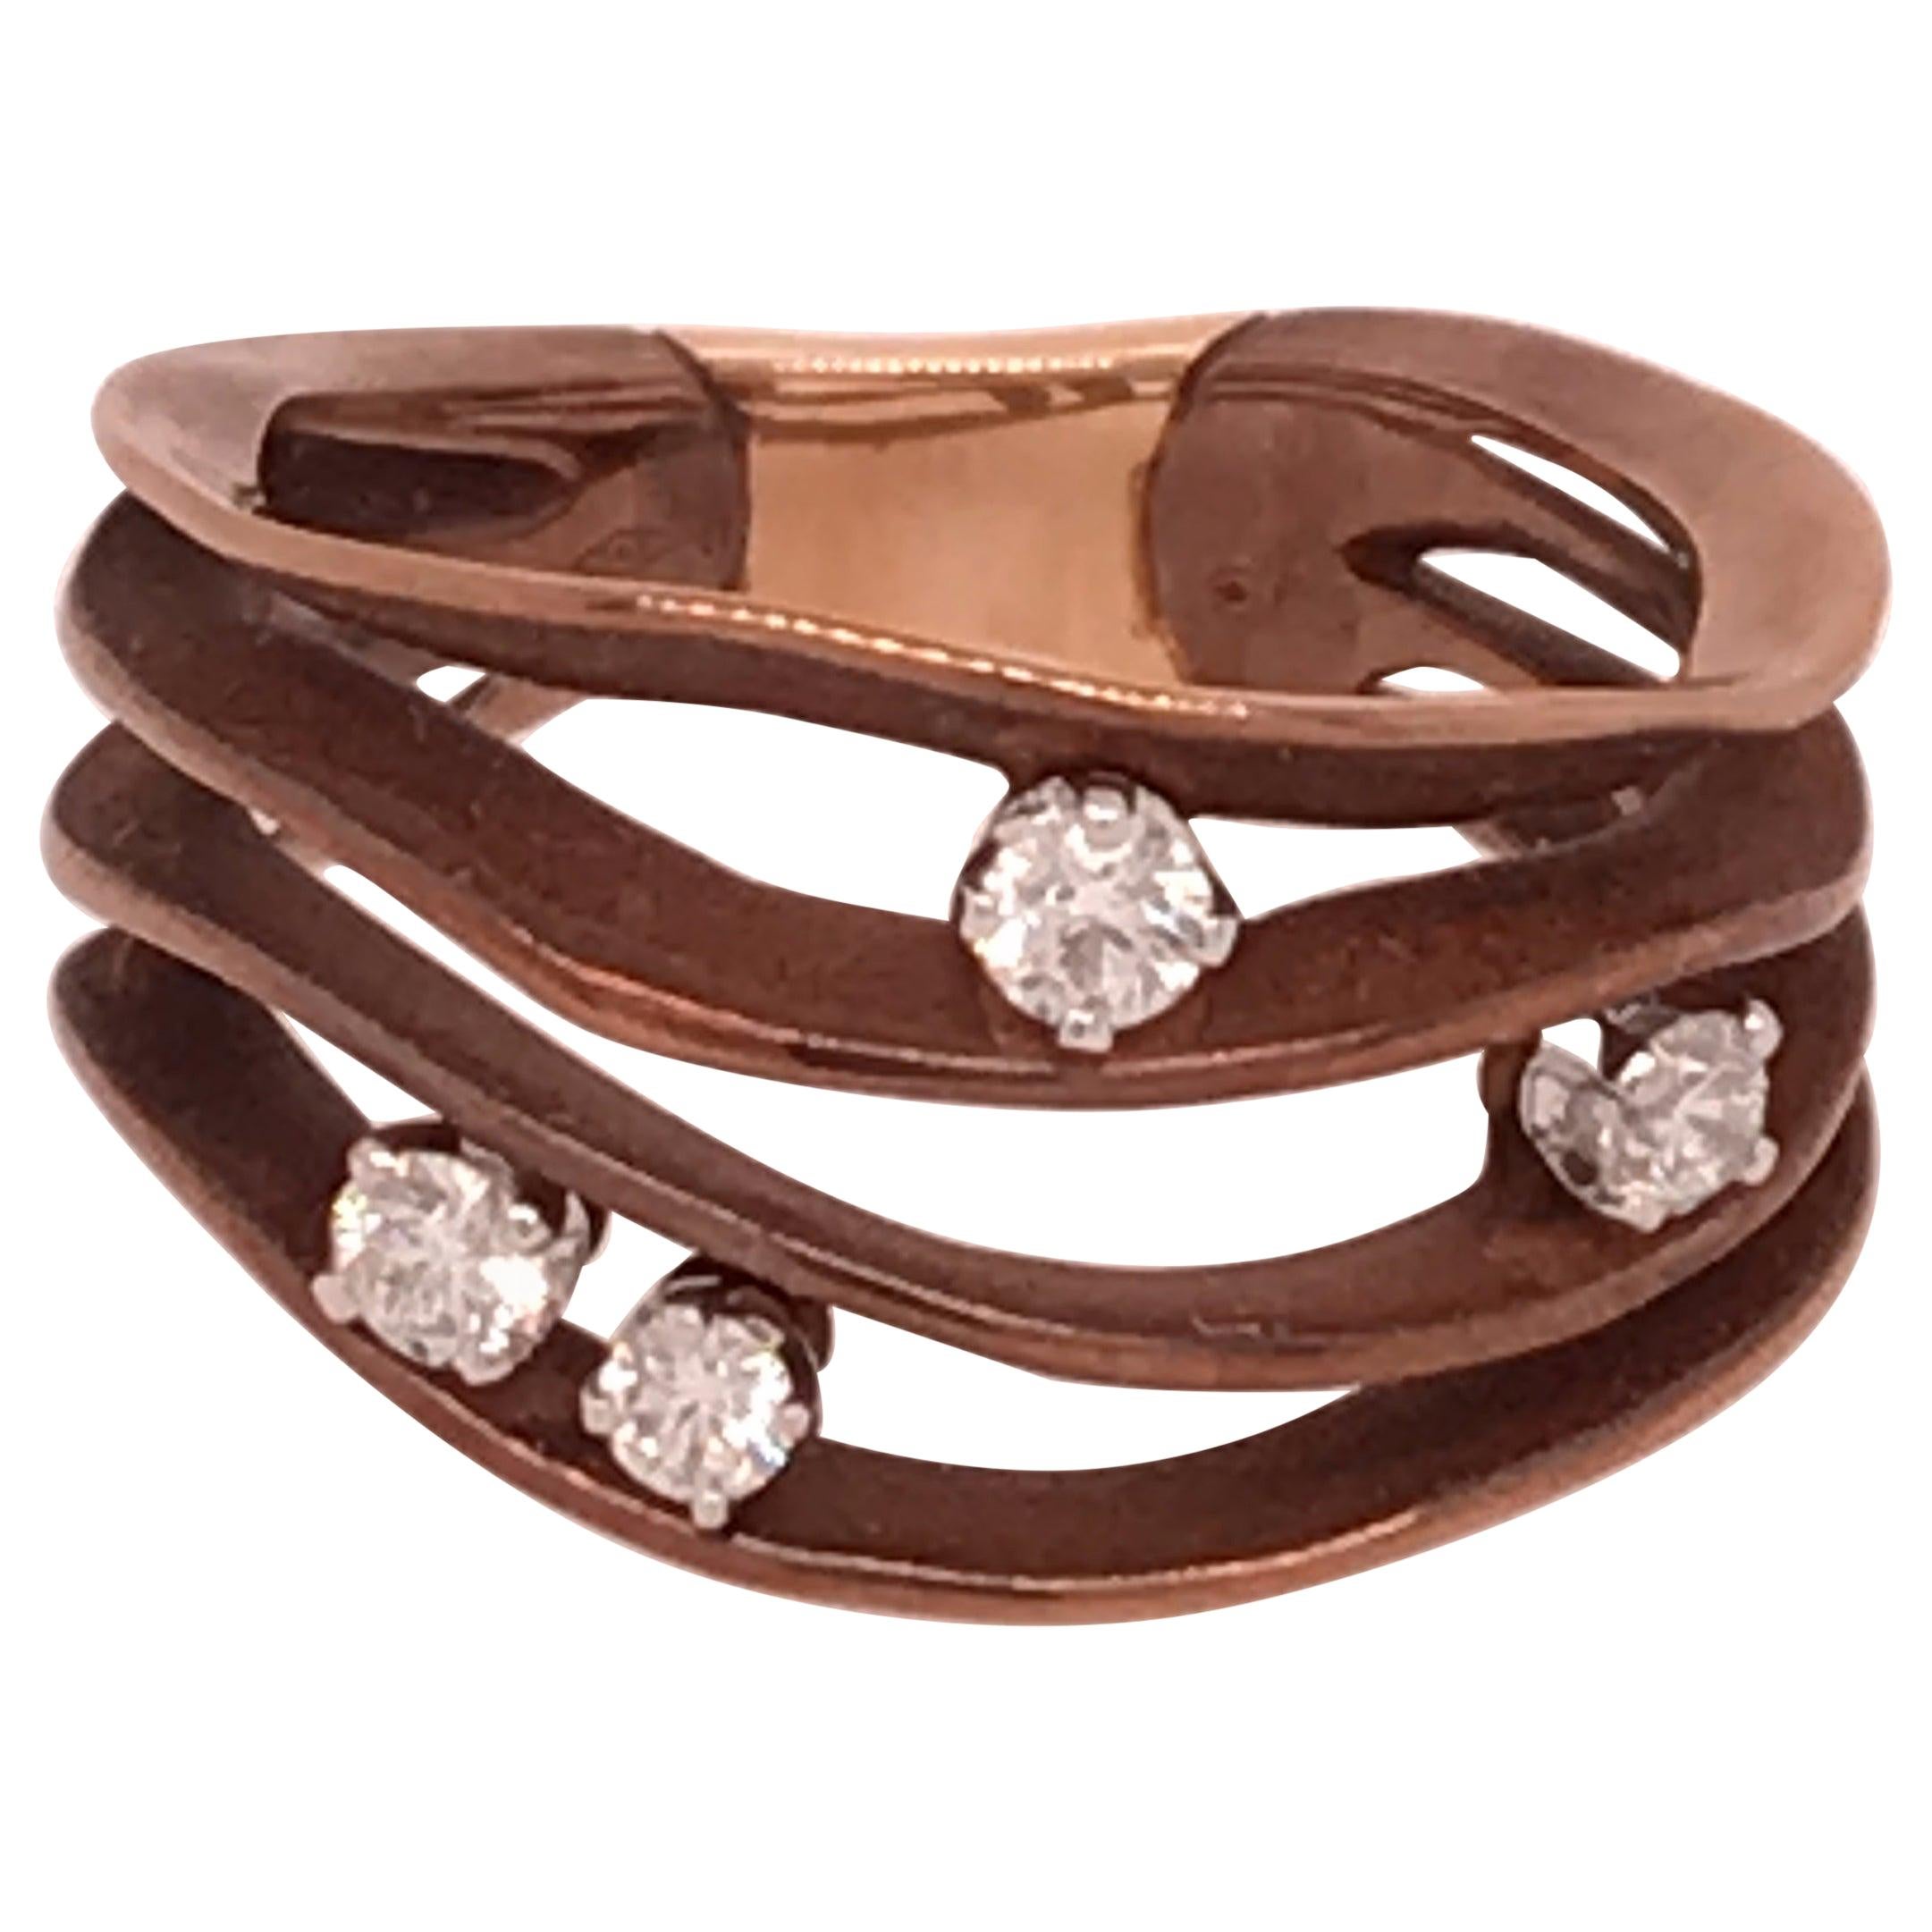 Annamaria Cammilli "Dune" Ring with Four Diamonds in 18k Brown Chocolate Gold